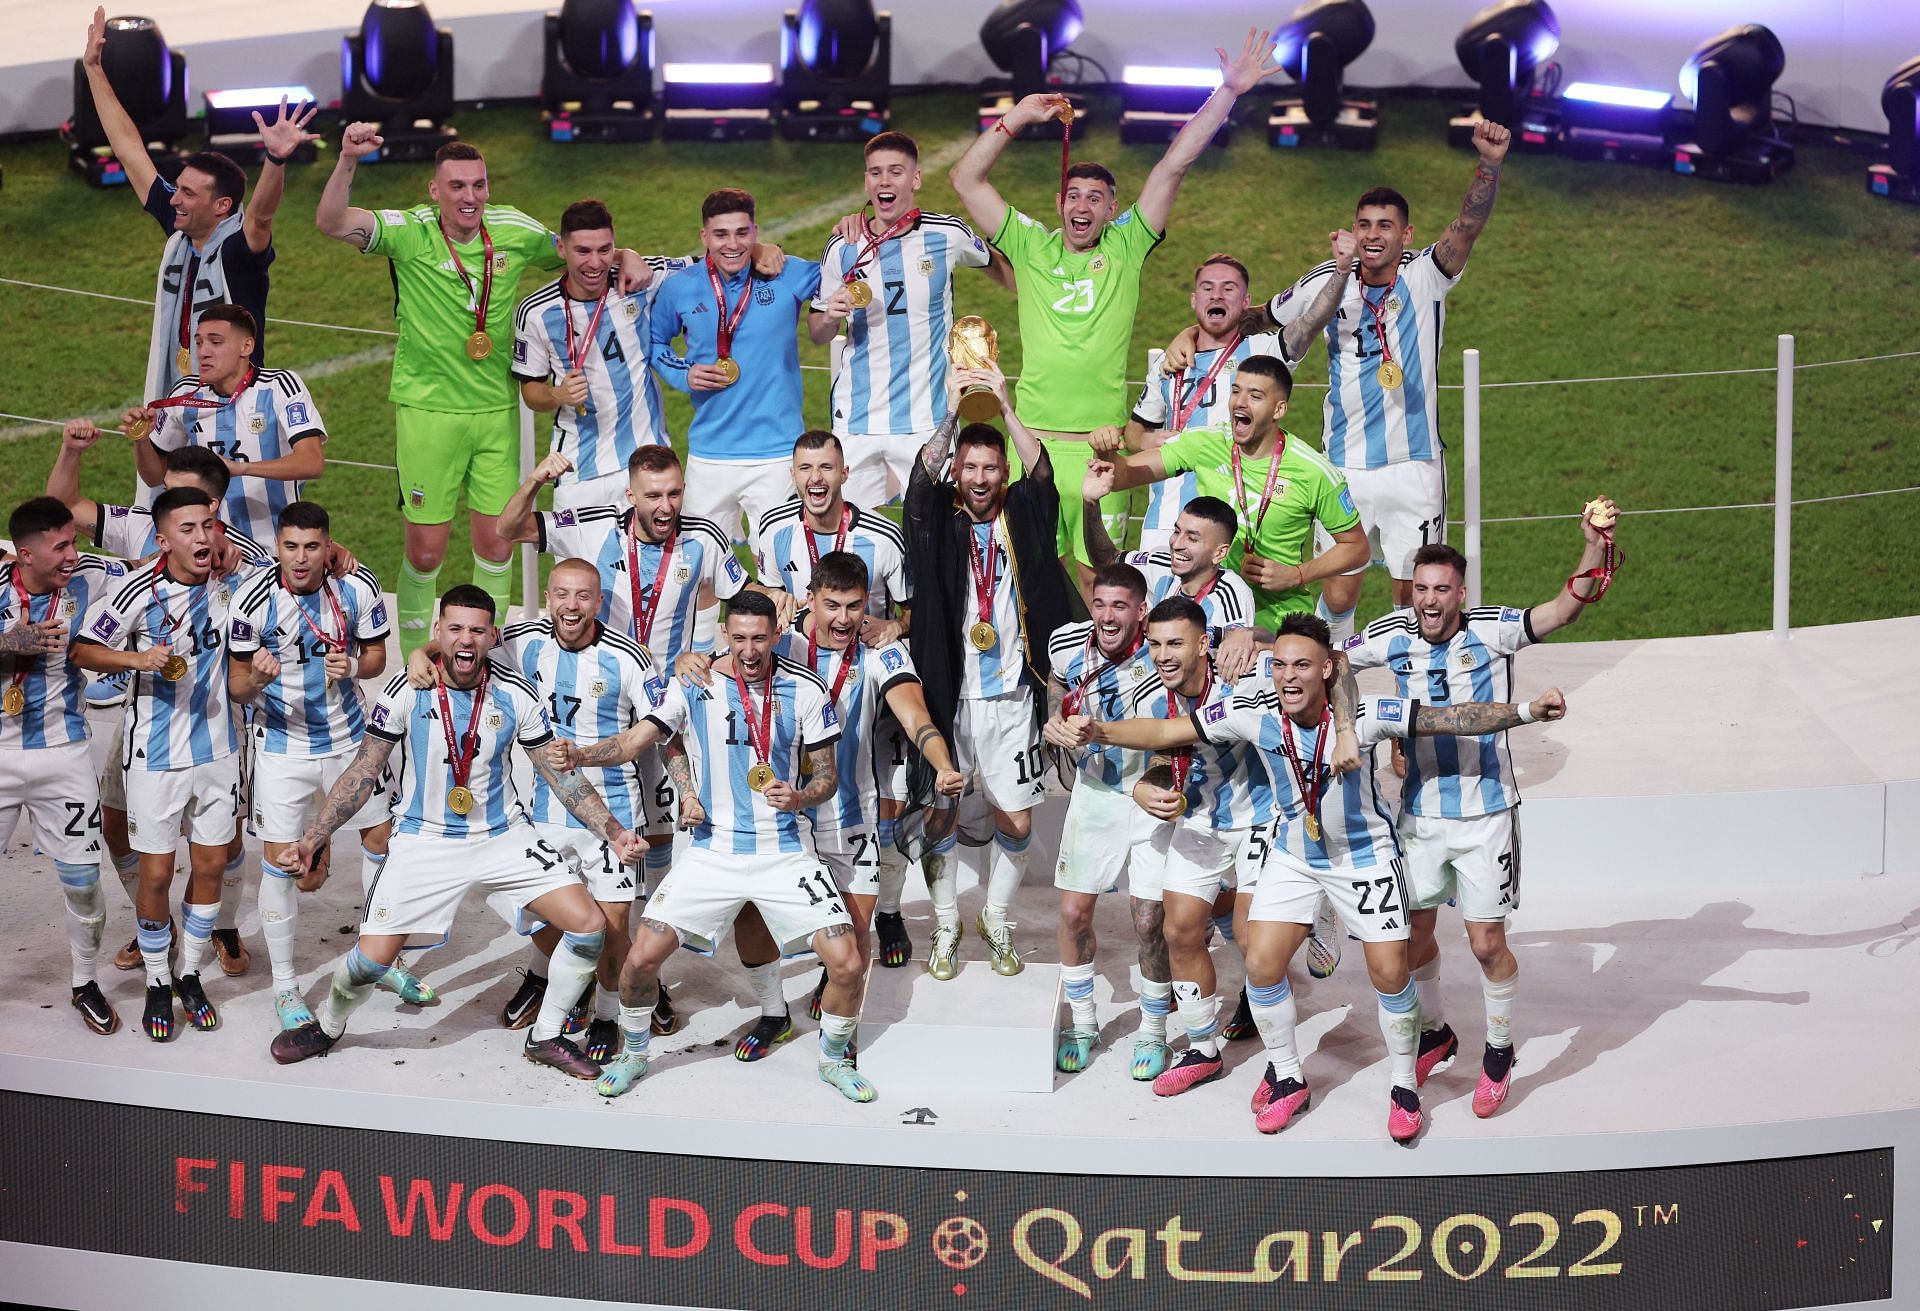 Argentina beat France in the FIFA World Cup final to win the trophy